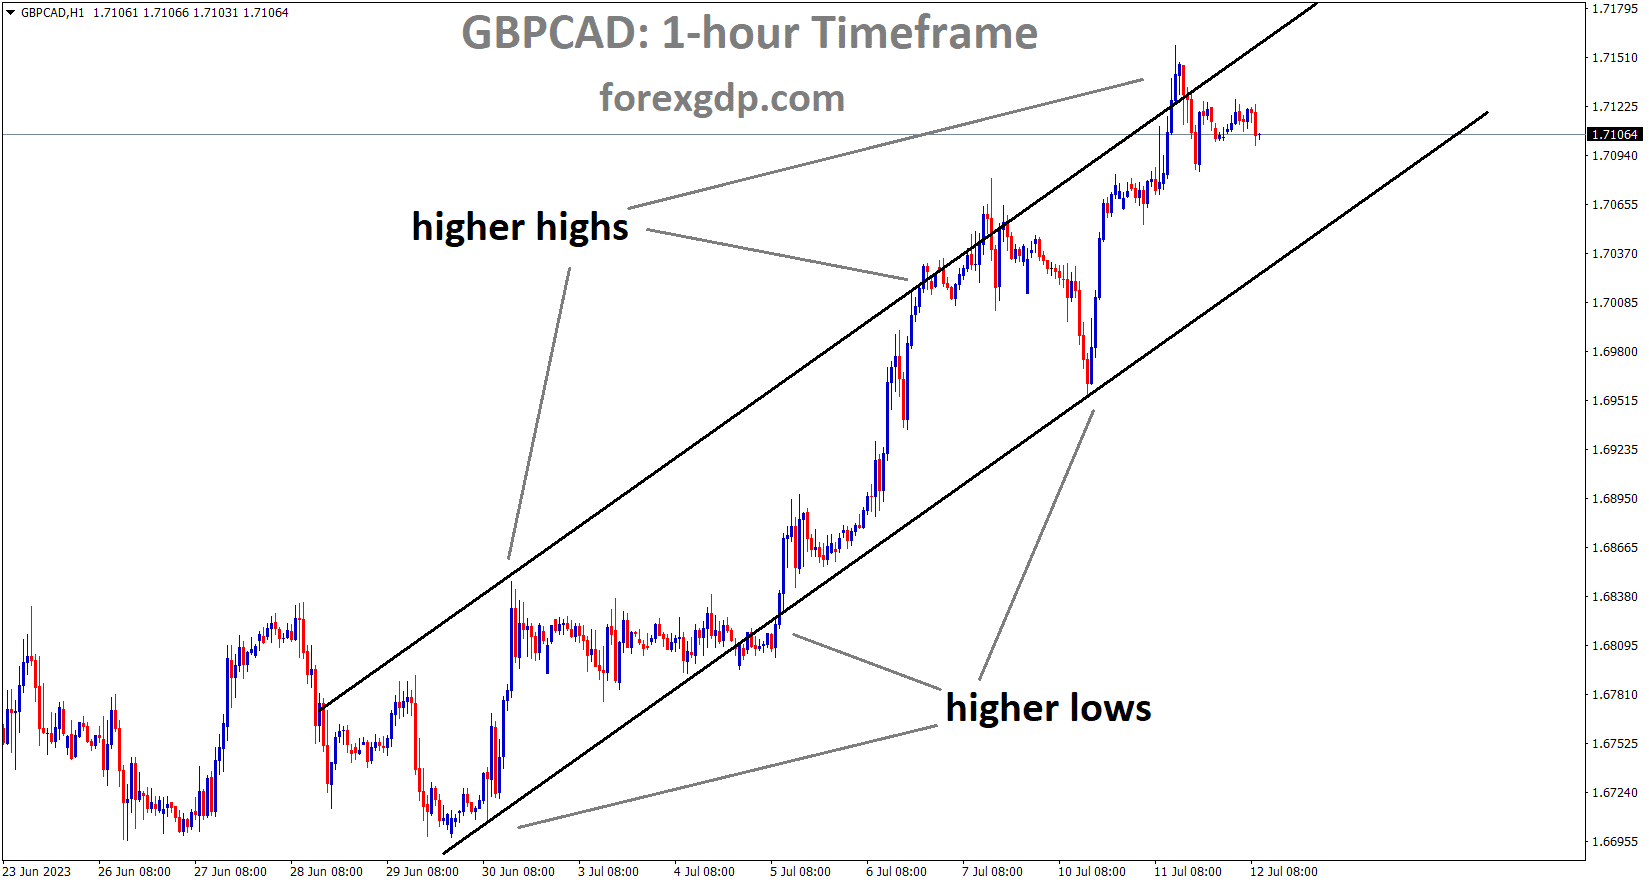 GBPCAD H1 TF analysis Market is moving in an Ascending channel and the market has fallen from the higher high area of the channel